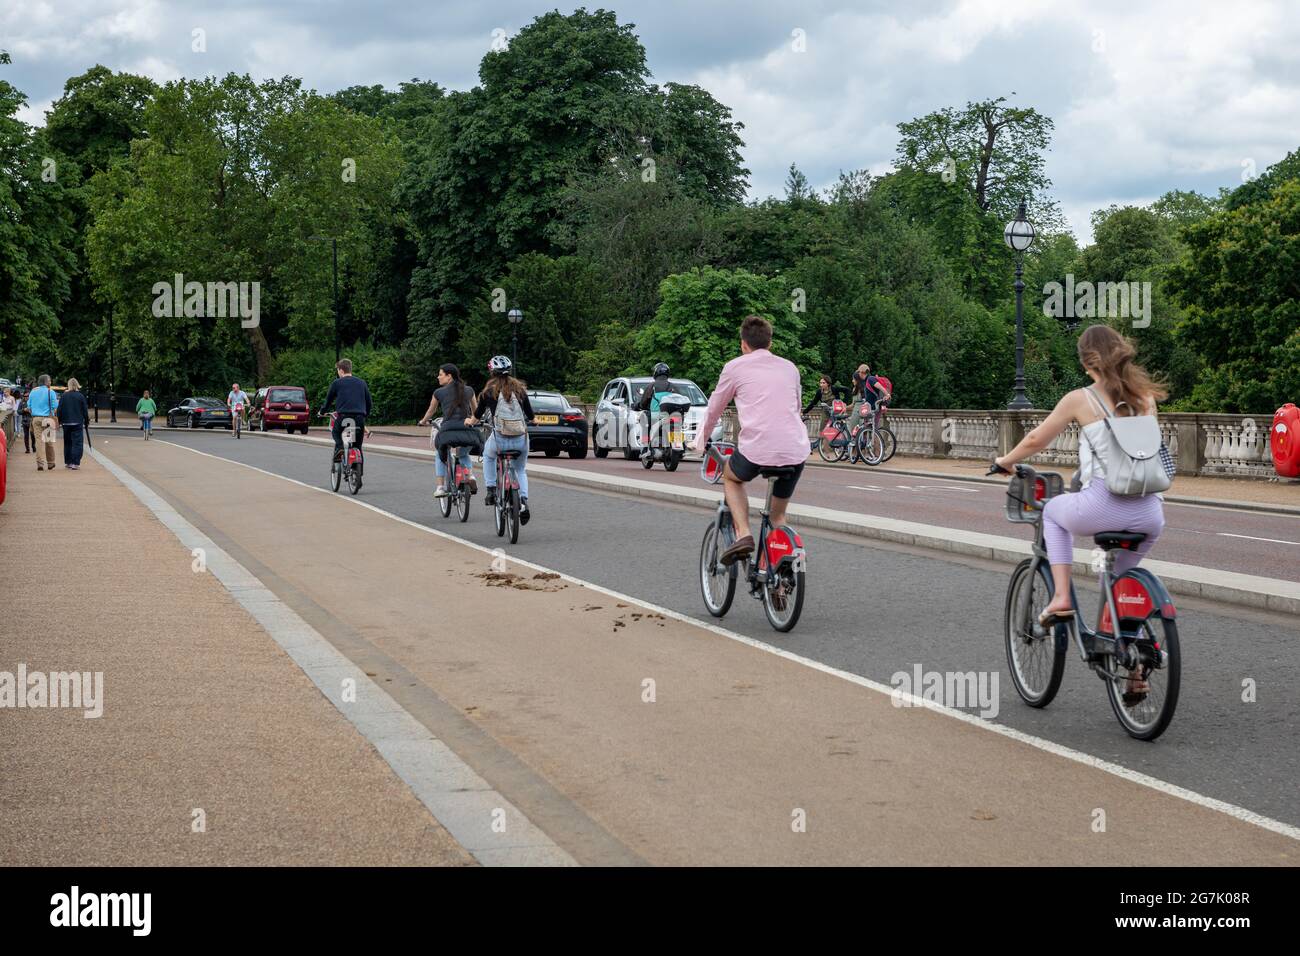 London. UK- 07.11.2021. Visitors and tourists sightseeing on bicycles in Hyde Park. Stock Photo